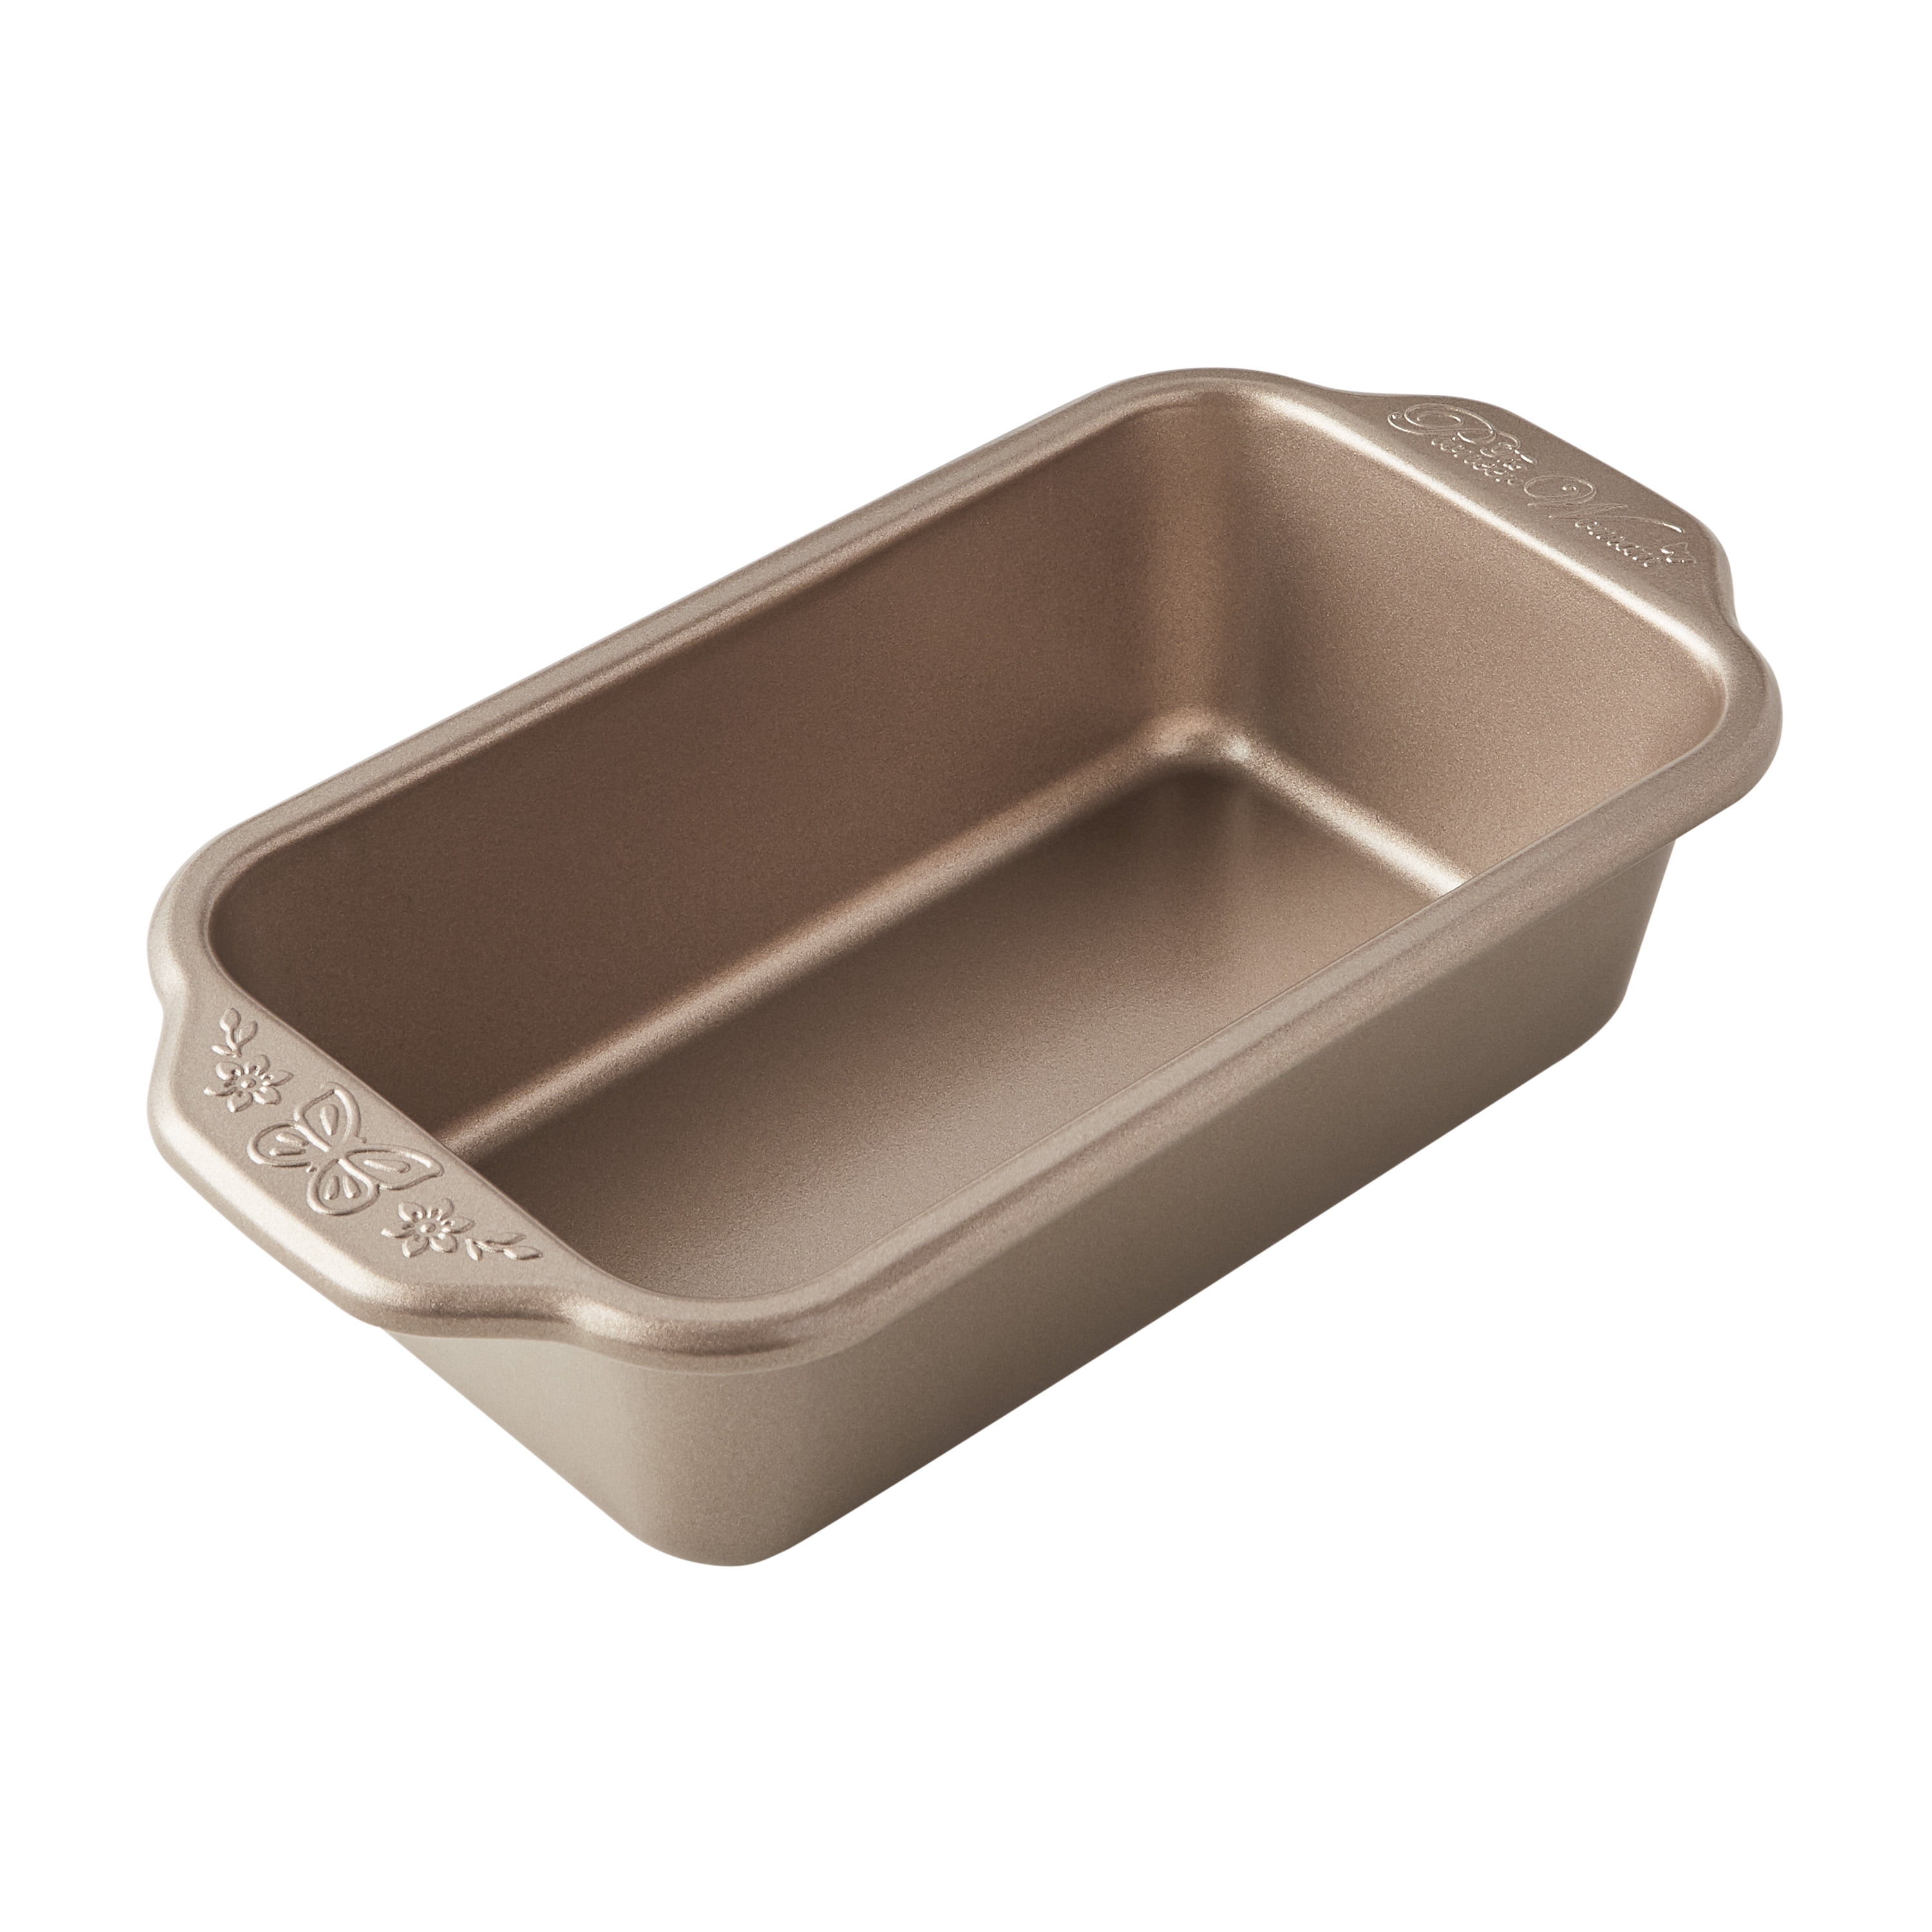 2 PACK COOKING CONCEPTS BREAD & LOAF PAN 8.4” x 4.4” x 2.5 Inch 